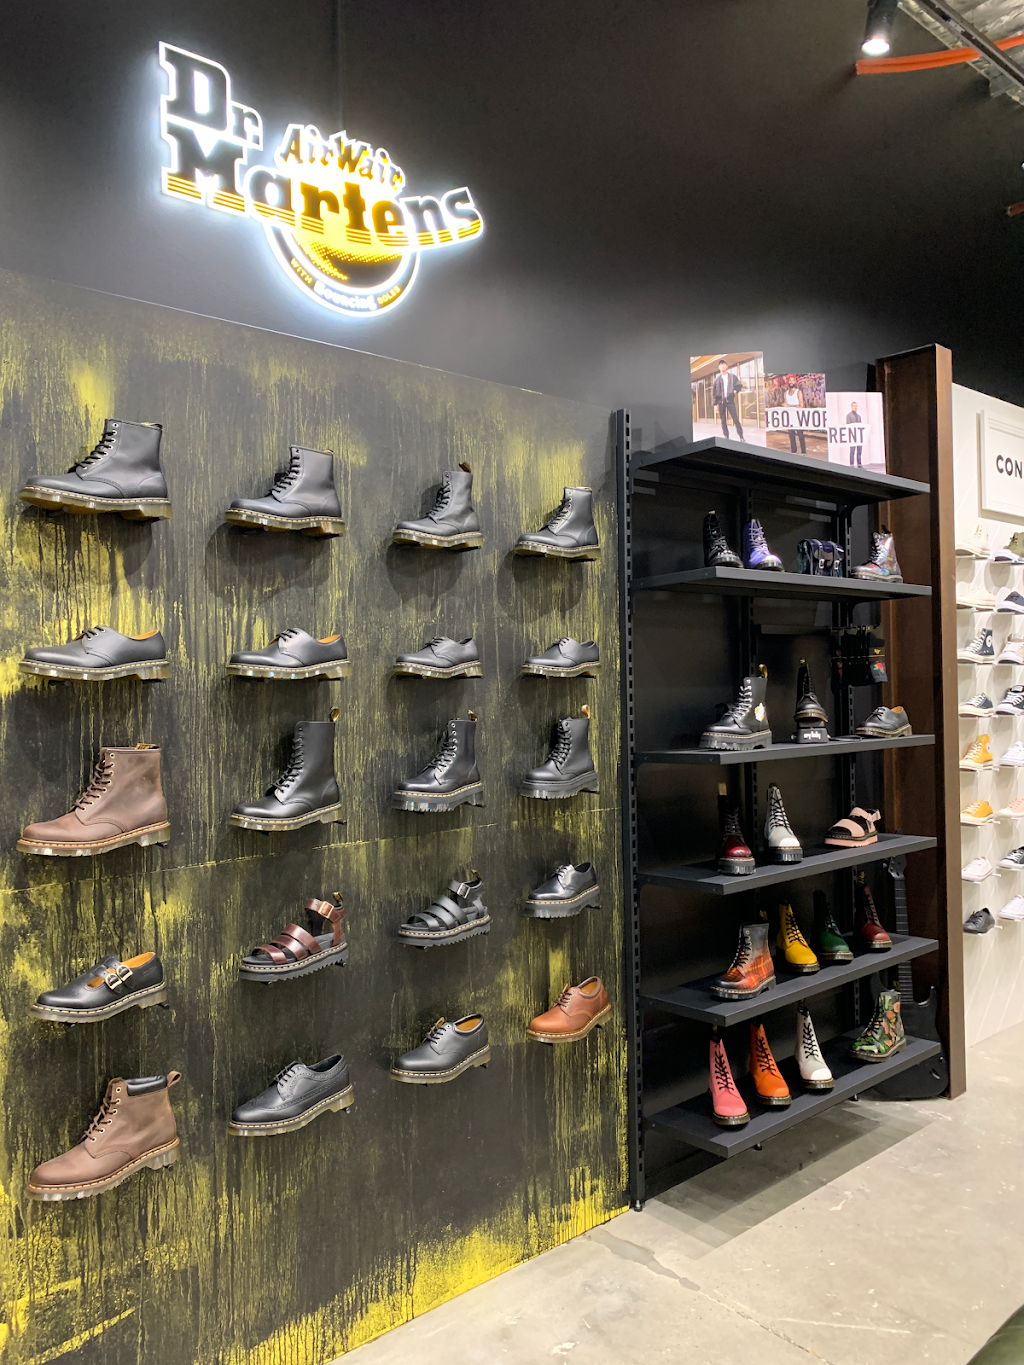 The Sneaker Lounge | shoe store | Shop 58 Park Beach Plaza, 253 Pacific Hwy, Coffs Harbour NSW 2450, Australia | 0266529229 OR +61 2 6652 9229